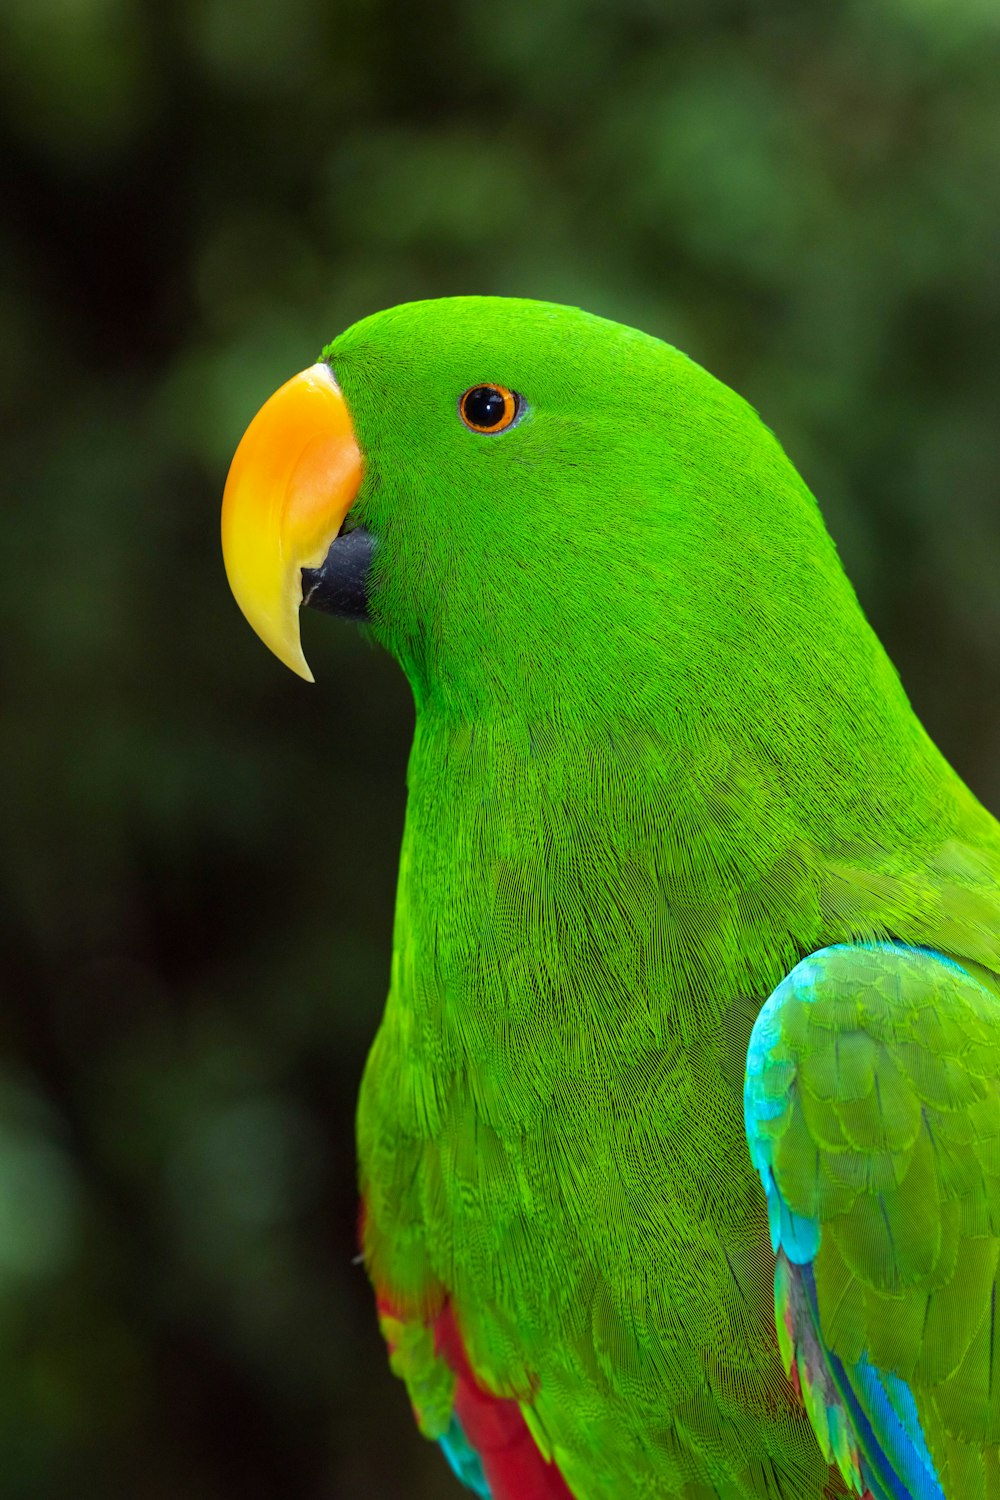 a close up of a green parrot with a yellow beak